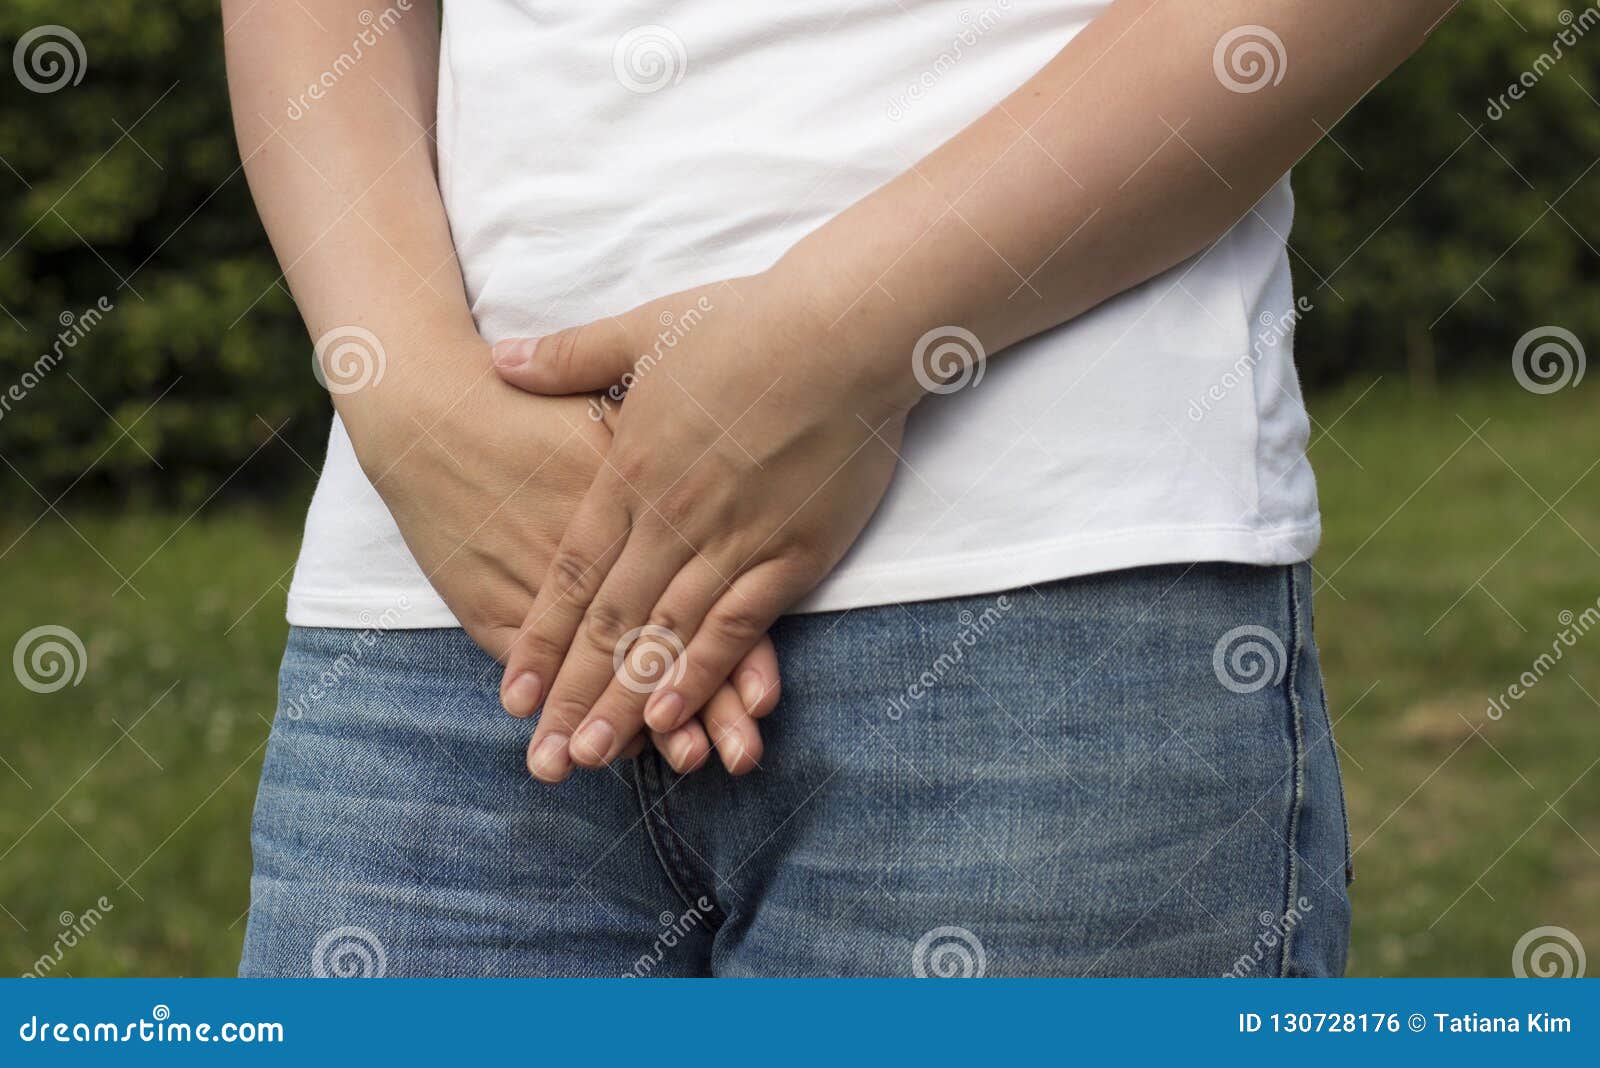 Woman With Hands Pointing Her Crotch Stock Photo, Picture and Royalty Free  Image. Image 51208521.